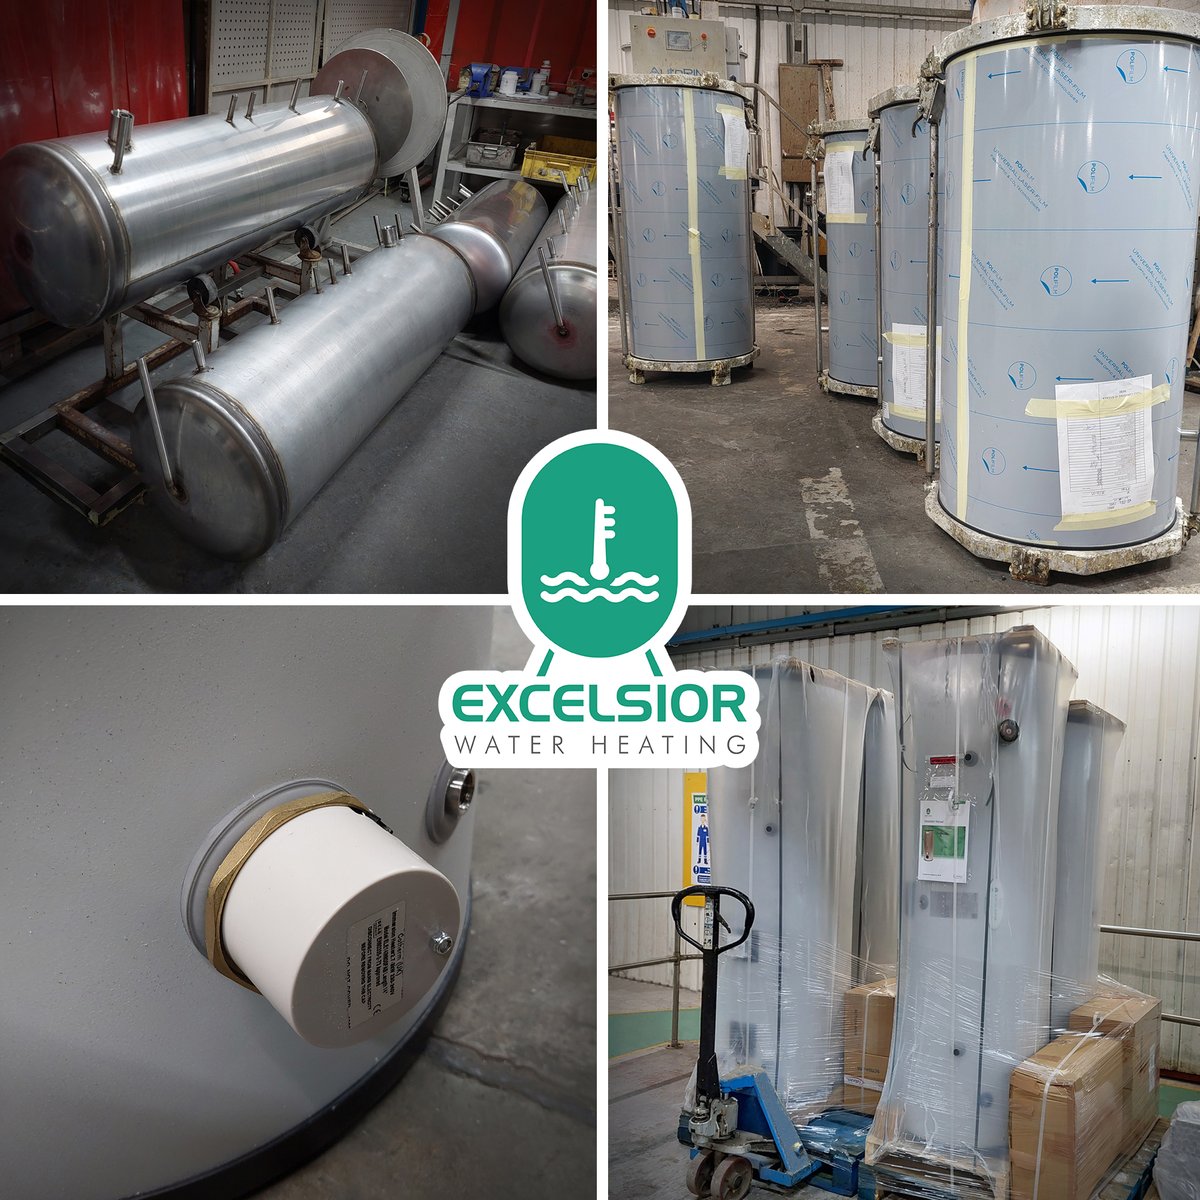 From welding to foaming, Immersion heater fitting to wrapping, we have water heaters at all manufacturing stages in the factory right now! #manufacturemonday #manufacturingmonday #domesticvessels #buffervessel #waterheater #waterheaters #factory #waterheating #hvac #ukmfg